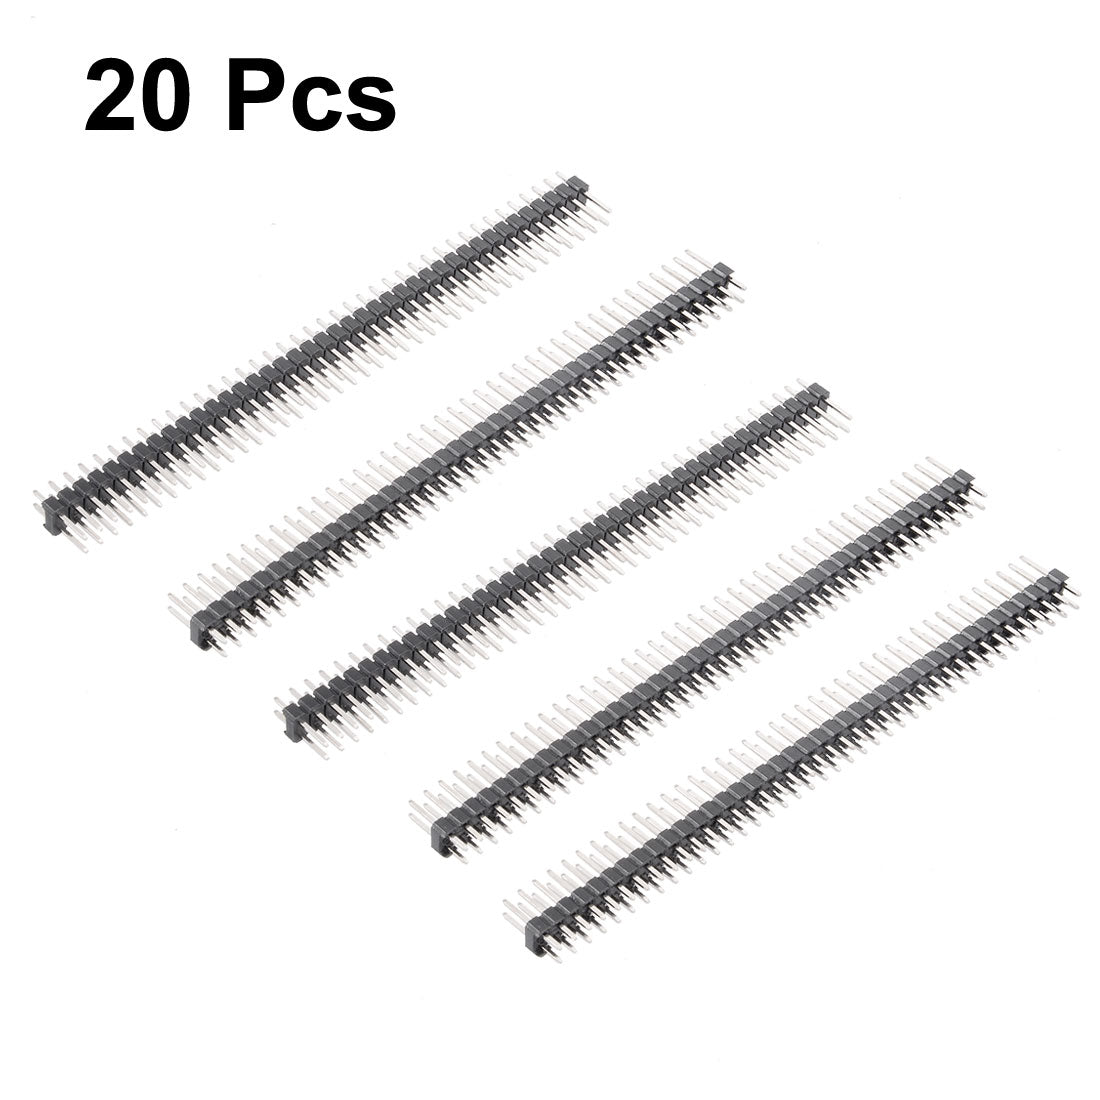 uxcell Uxcell 20Pcs 2.54mm Pitch 40-Pin 12mm Length Double Row Straight Connector Pin Header Strip for Arduino Prototype Shield